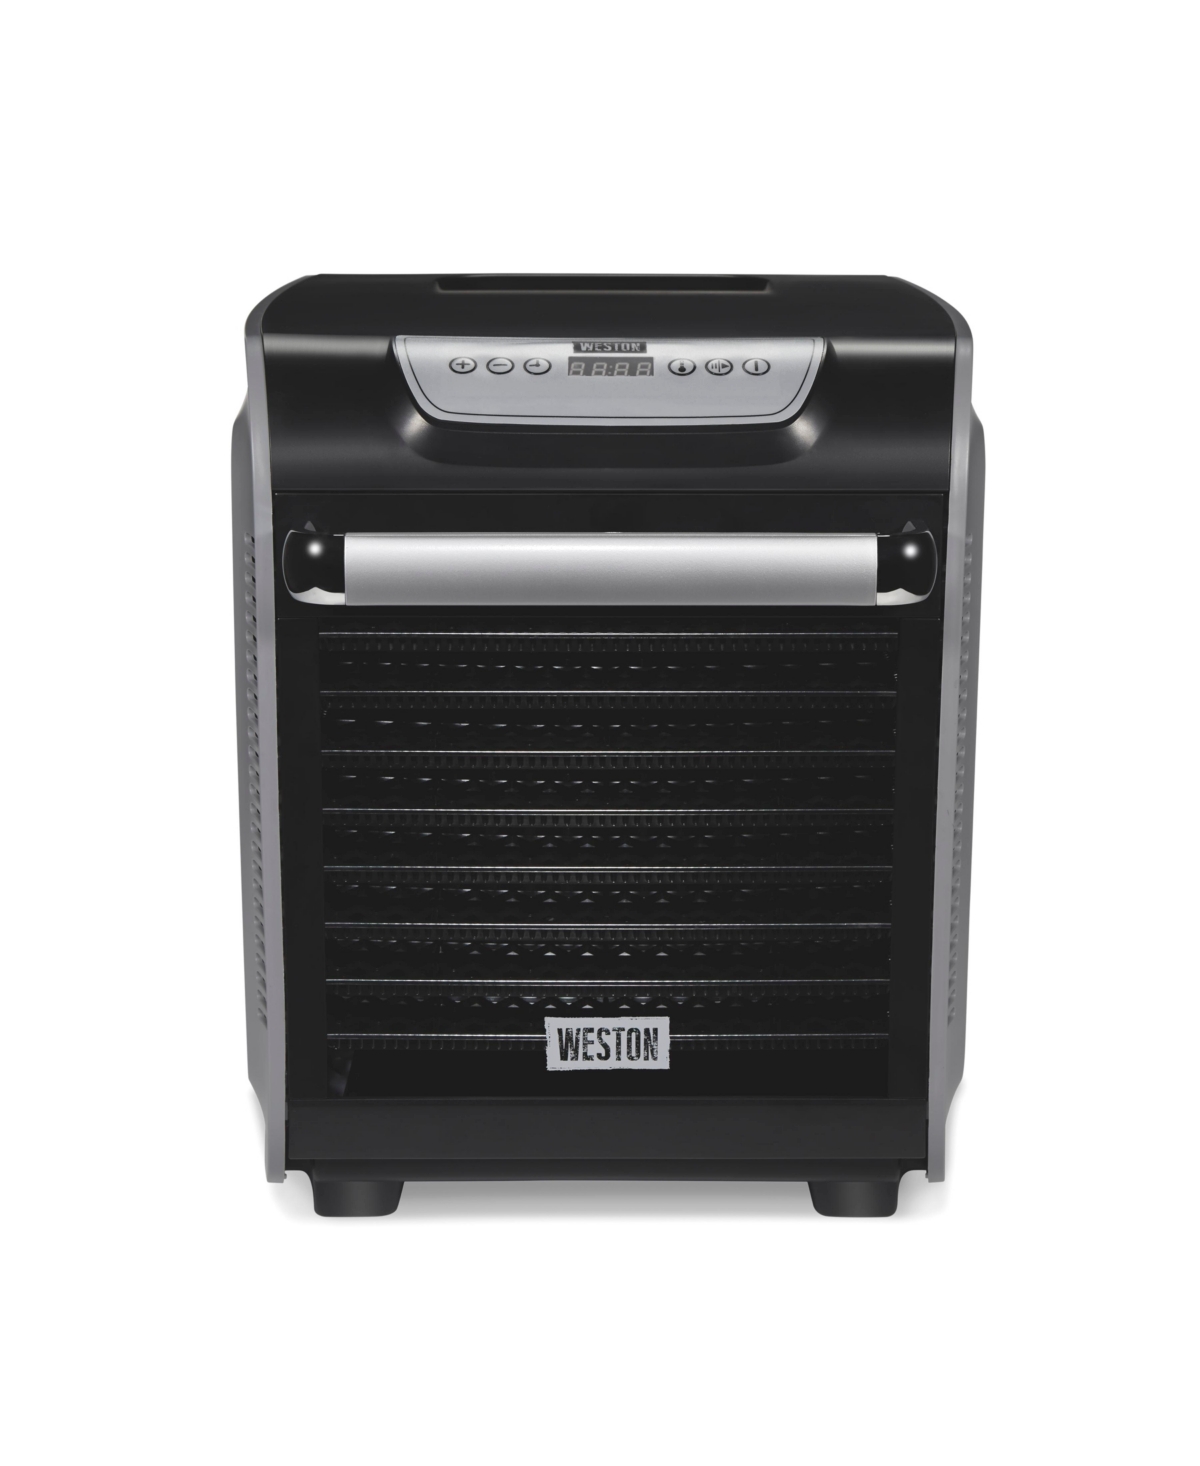 Weston 10 Tray Digital Food Dehydrator With Oven-style Door In Black And Silver-tone